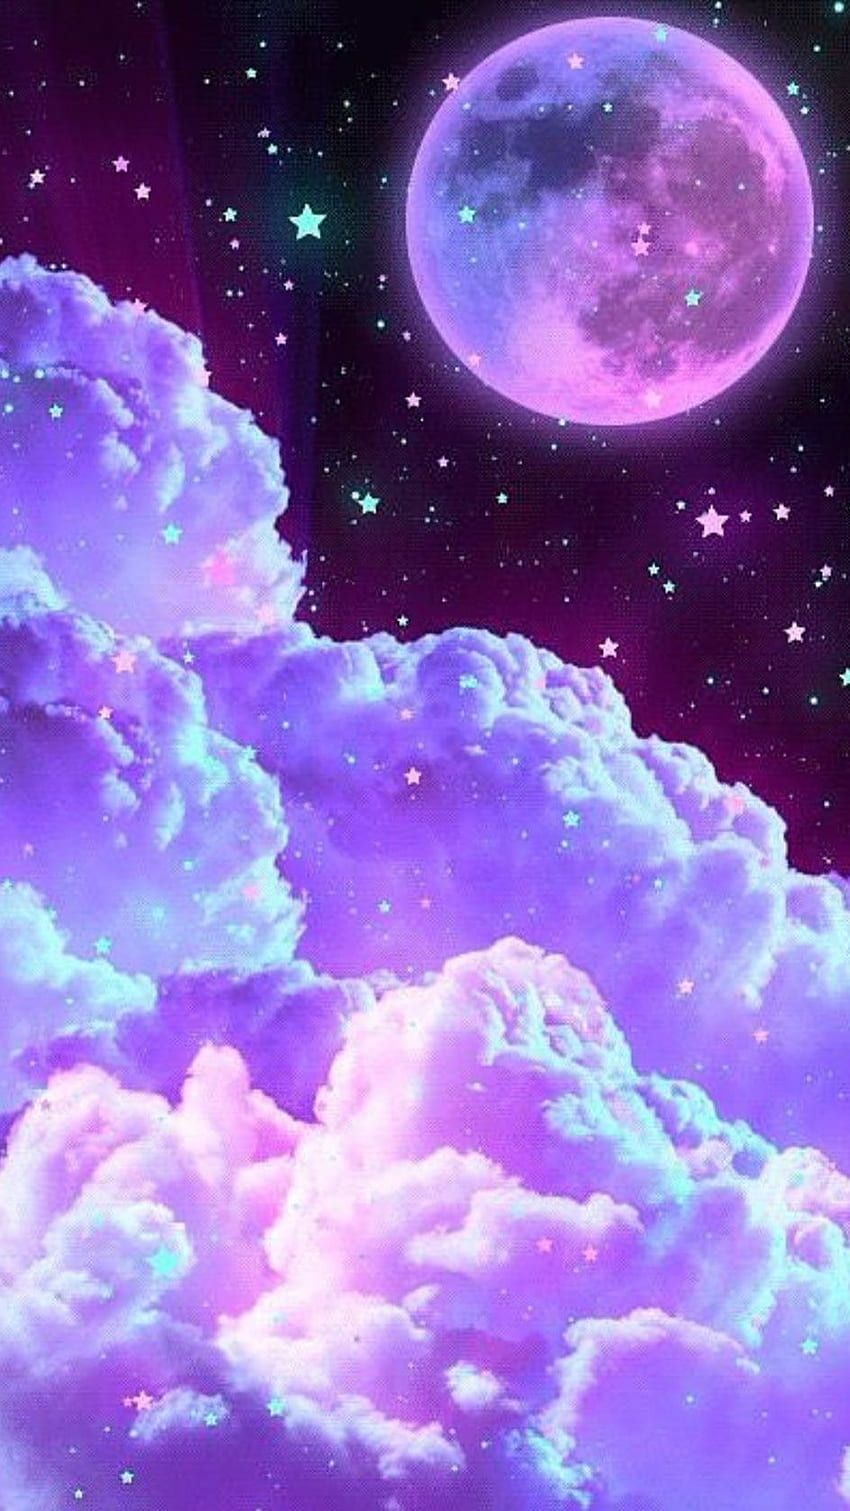 Moon and clouds wallpaper - Galaxy